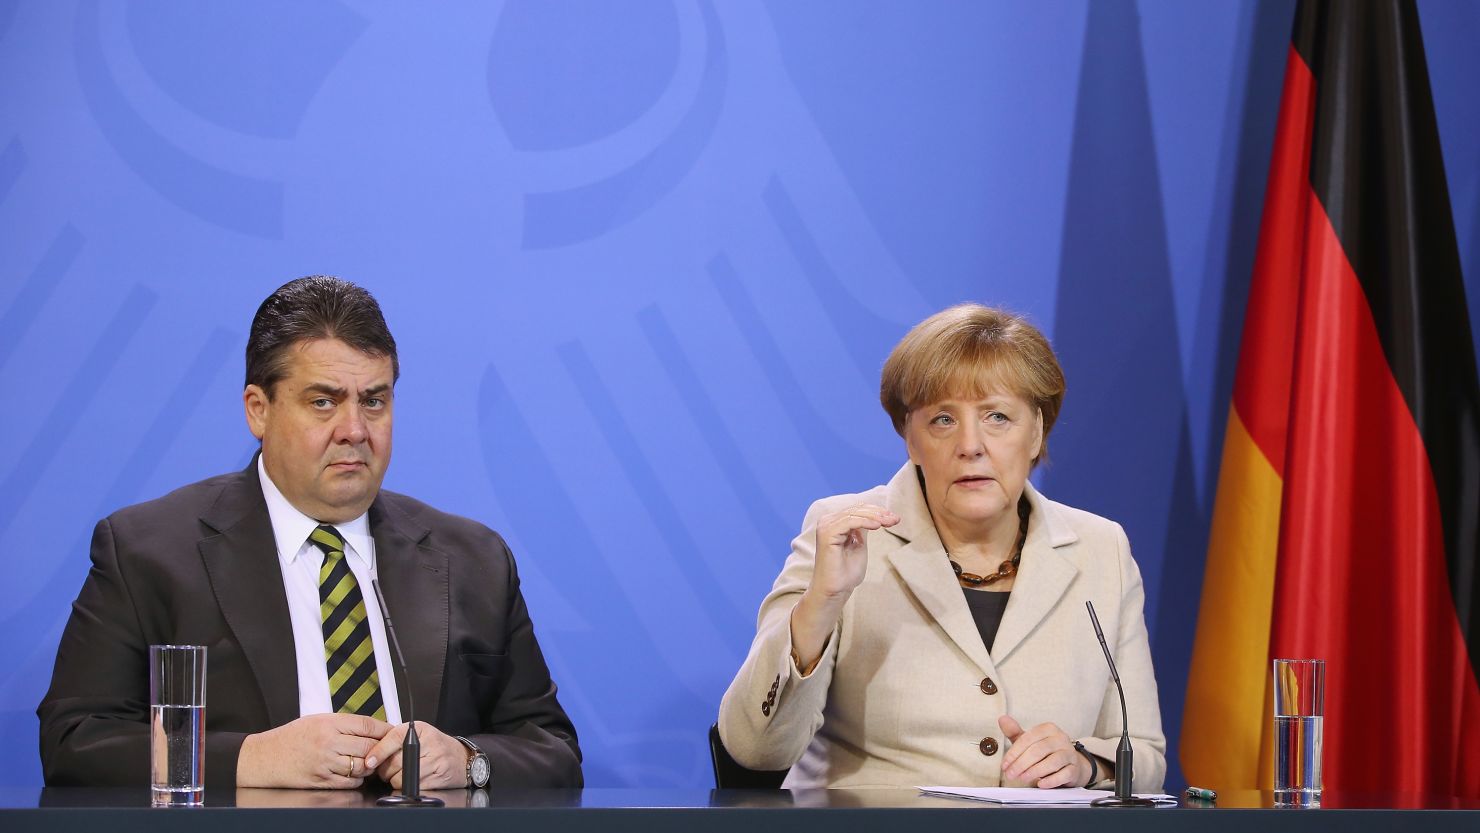 Germany's Vice Chancellor Sigmar Gabriel, seen here with Chancellor Angela Merkel, is the most high-profile western politician to accuse Saudi Arabia of condoning extremism.